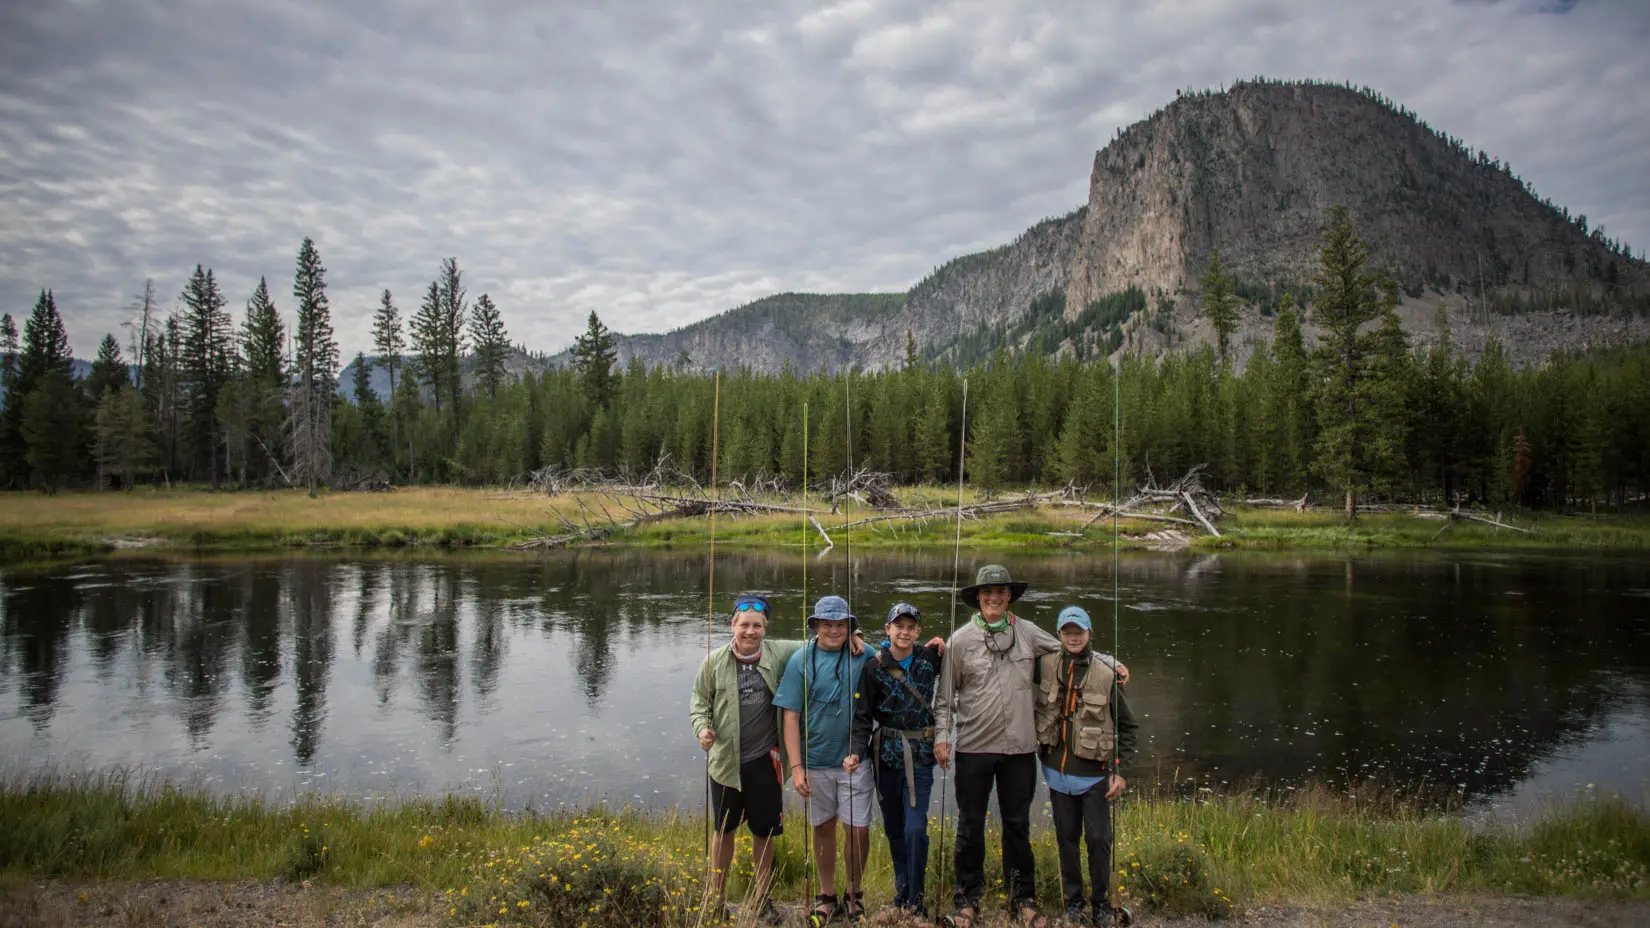 Group of travelers by a lake in Yosemite